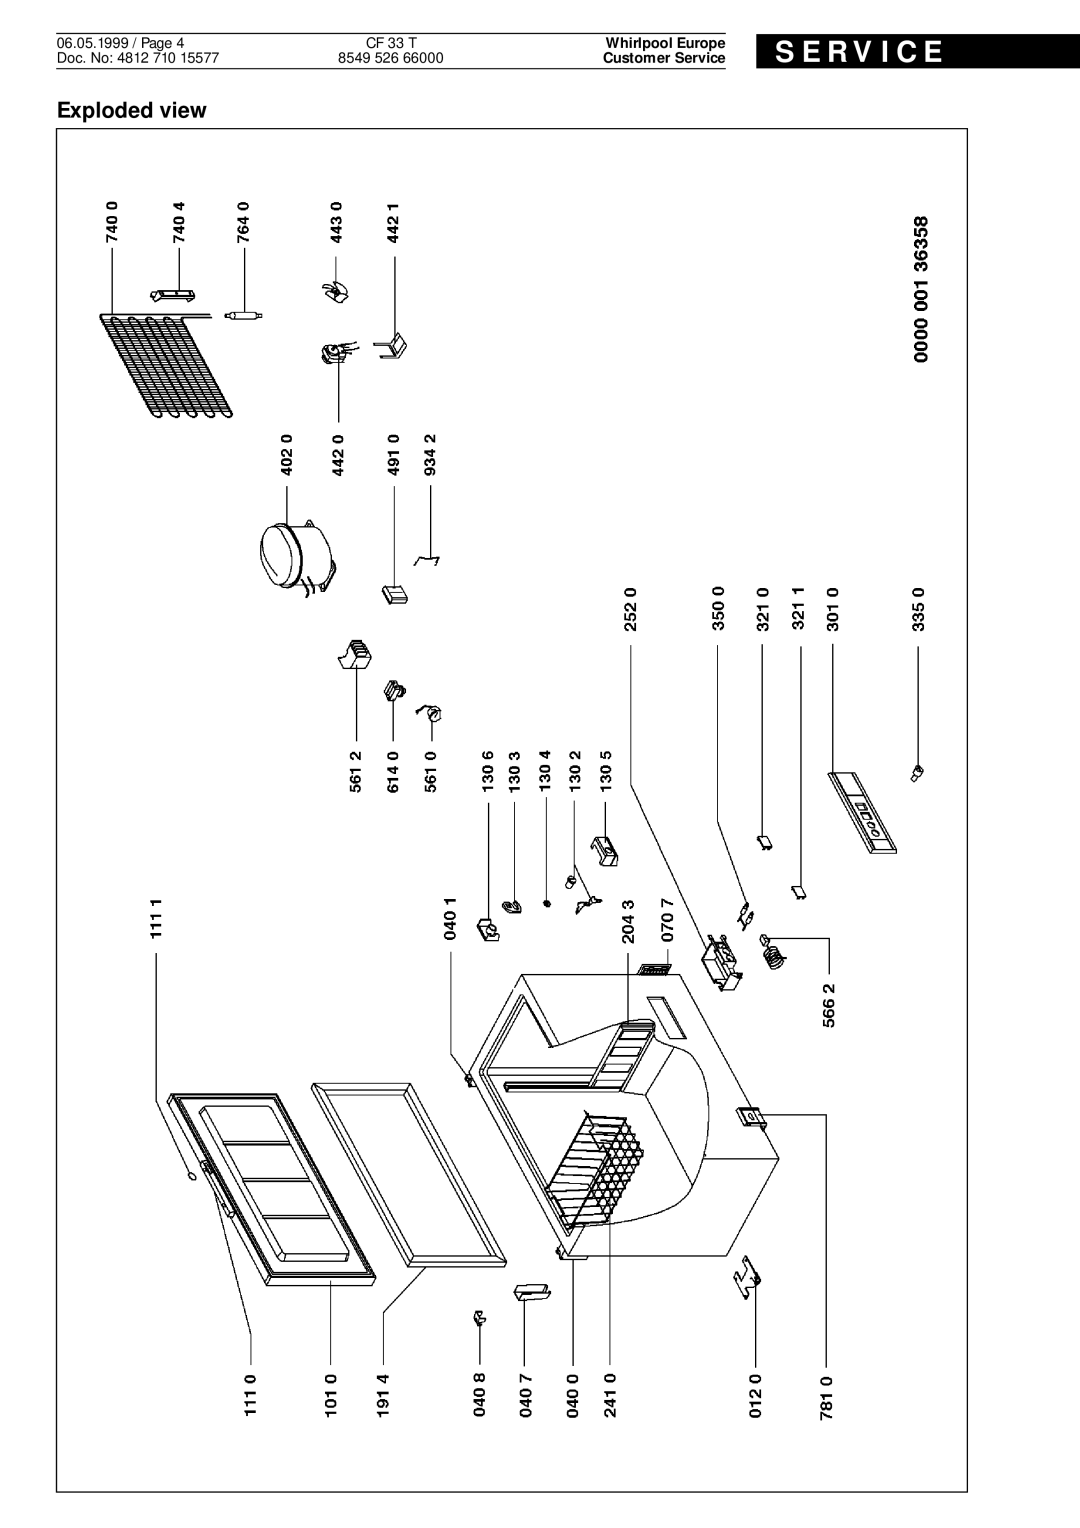 Whirlpool CF 33 T service manual Exploded view, S E R V I C E, Whirlpool Europe, Customer Service 